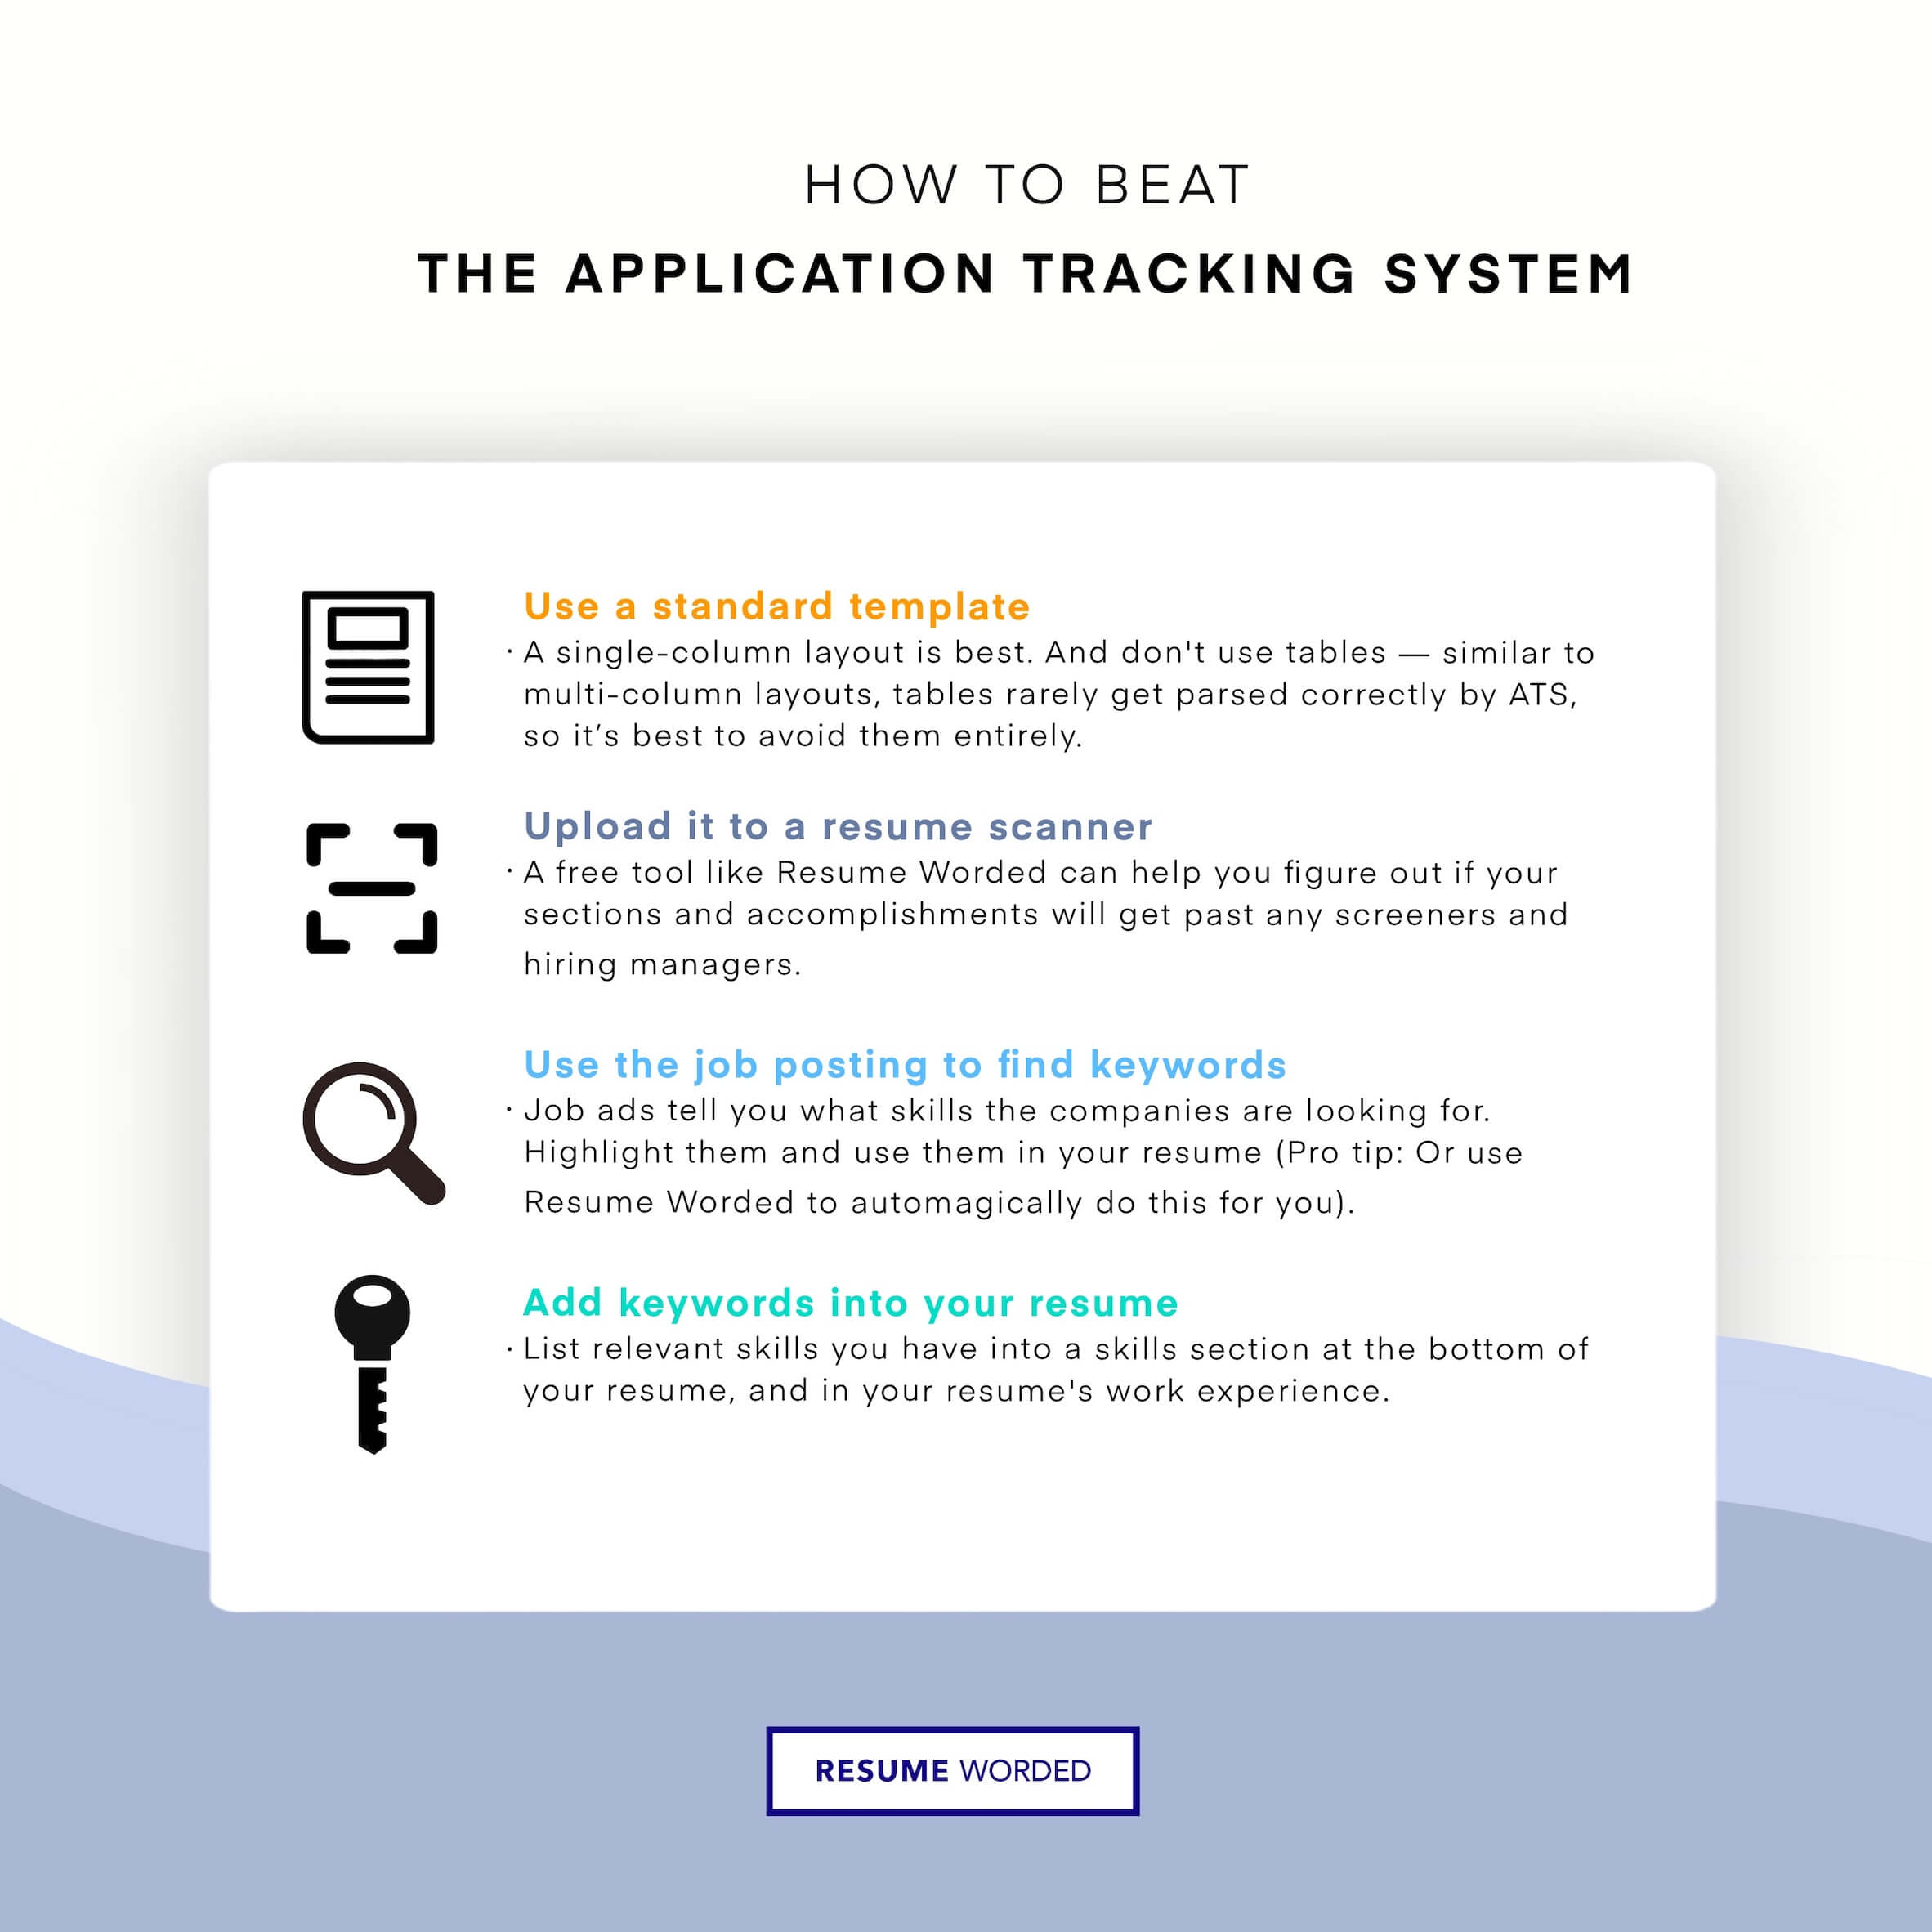 An infographic that shows you the key things to keep in mind to get past applicant tracking systems